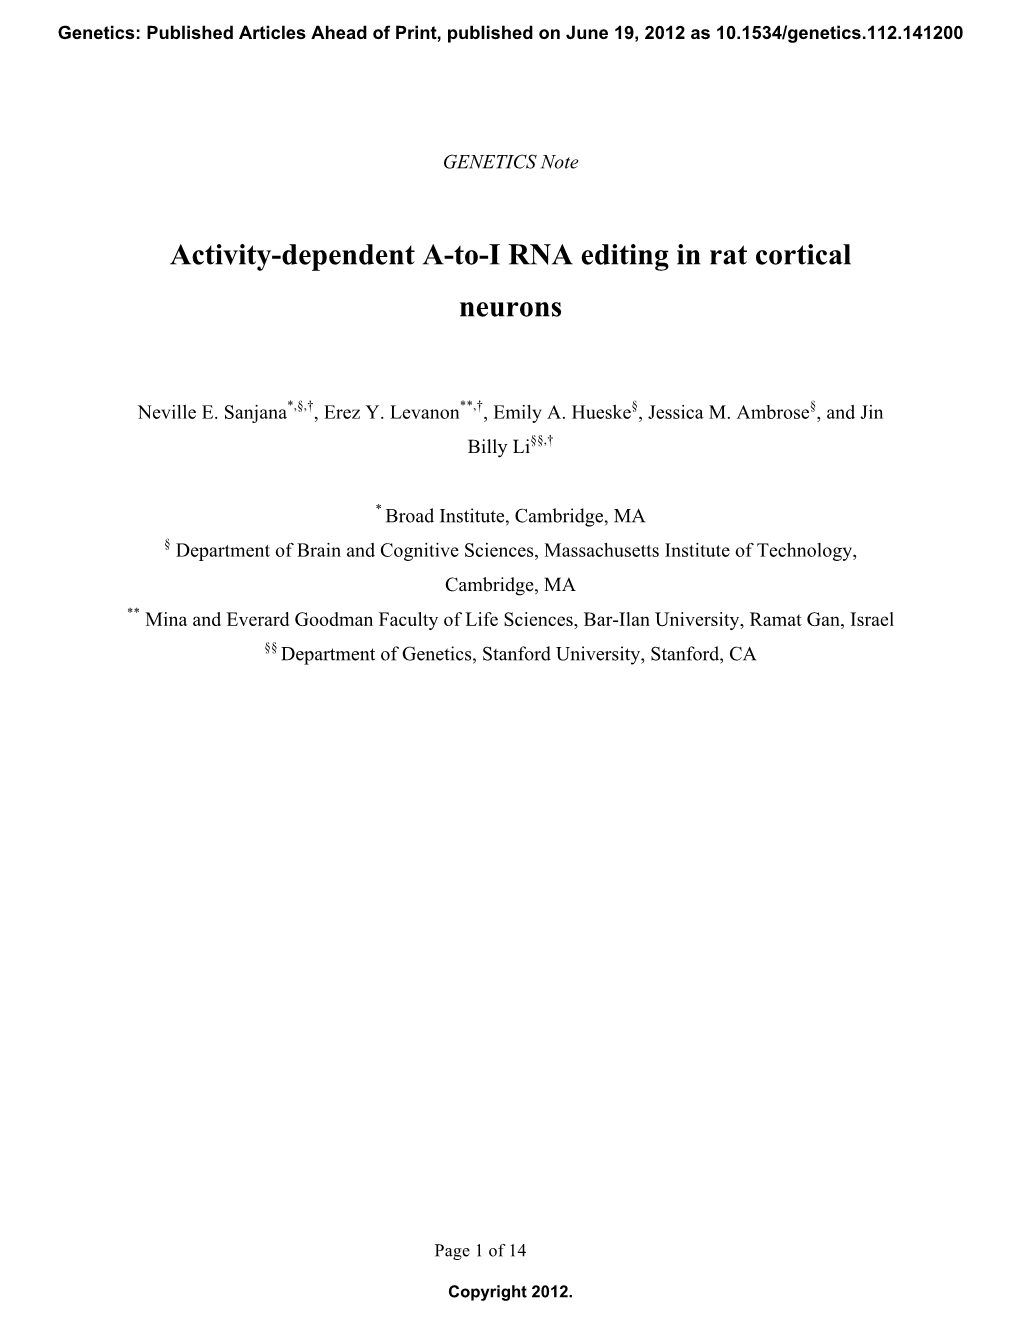 Activity-Dependent A-To-I RNA Editing in Rat Cortical Neurons